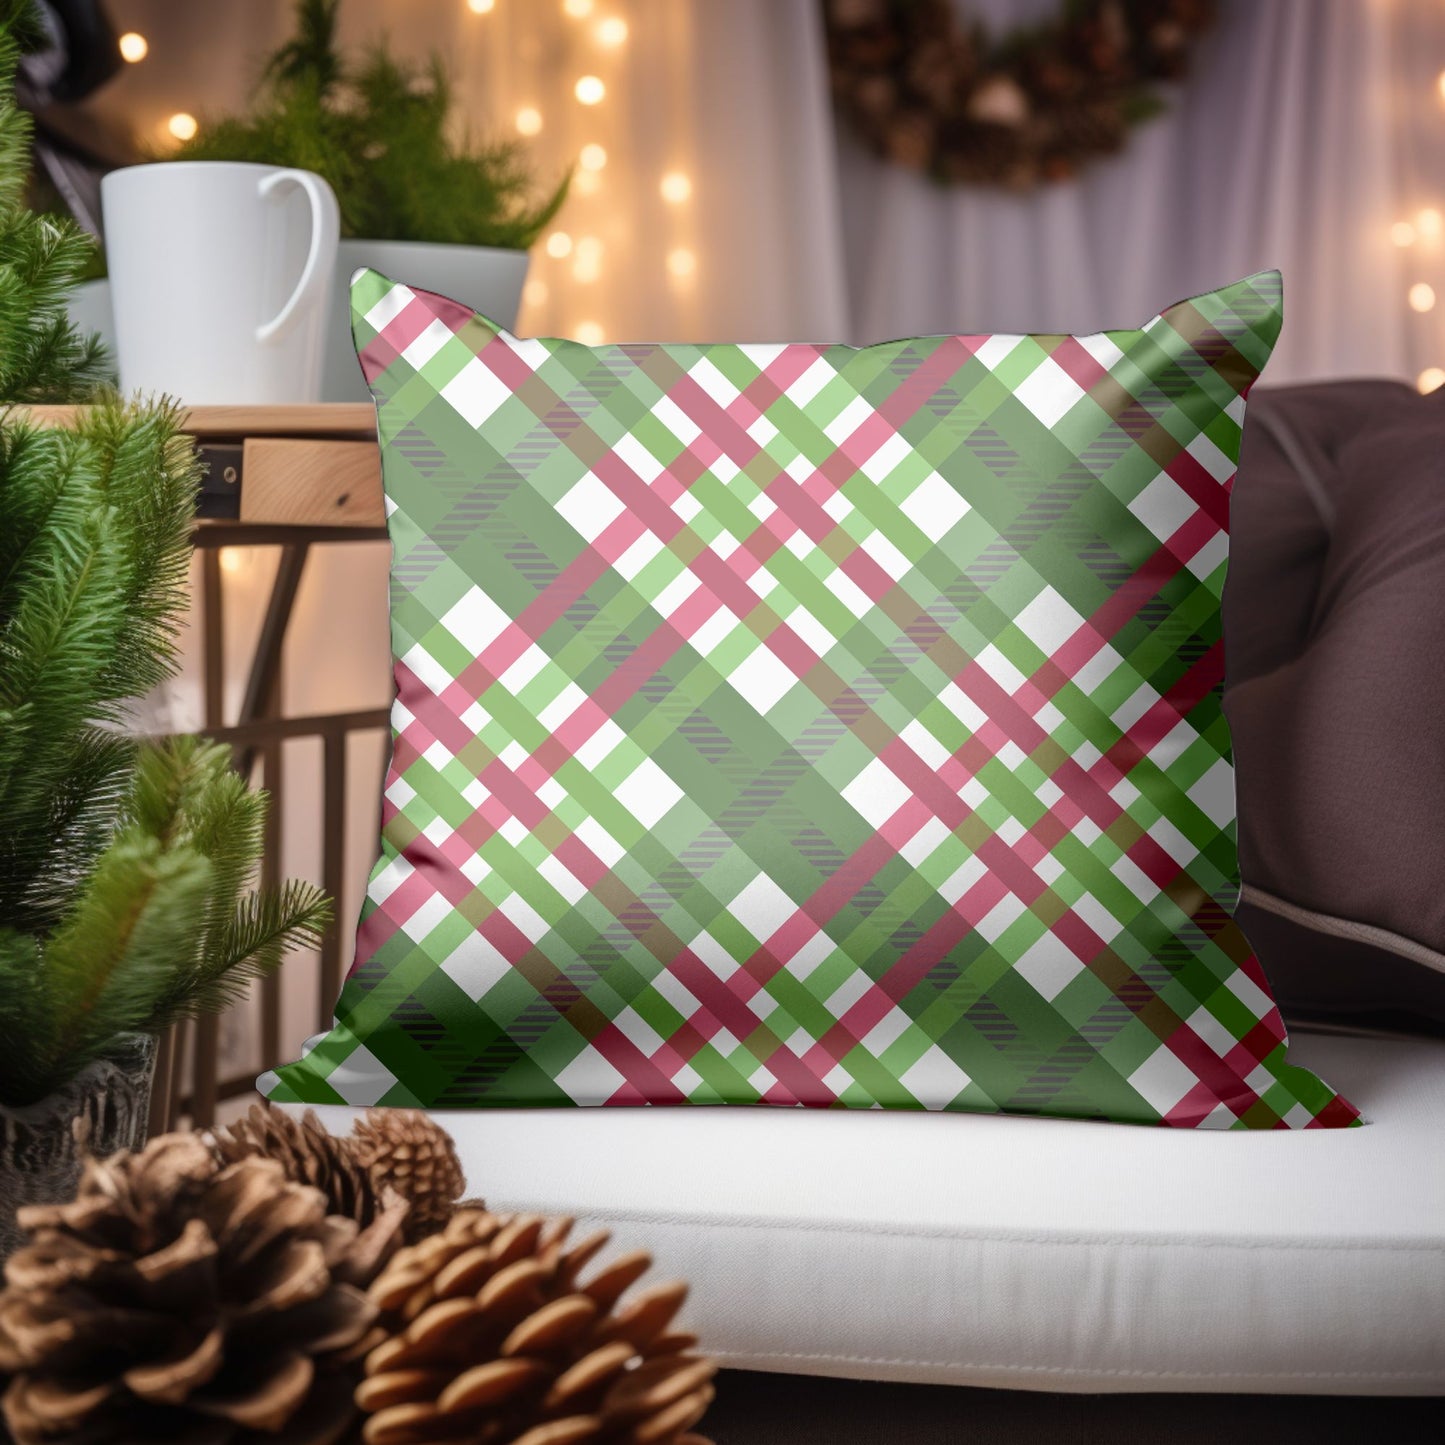 Classic Red and Green Plaid Pillow for Holiday Decor